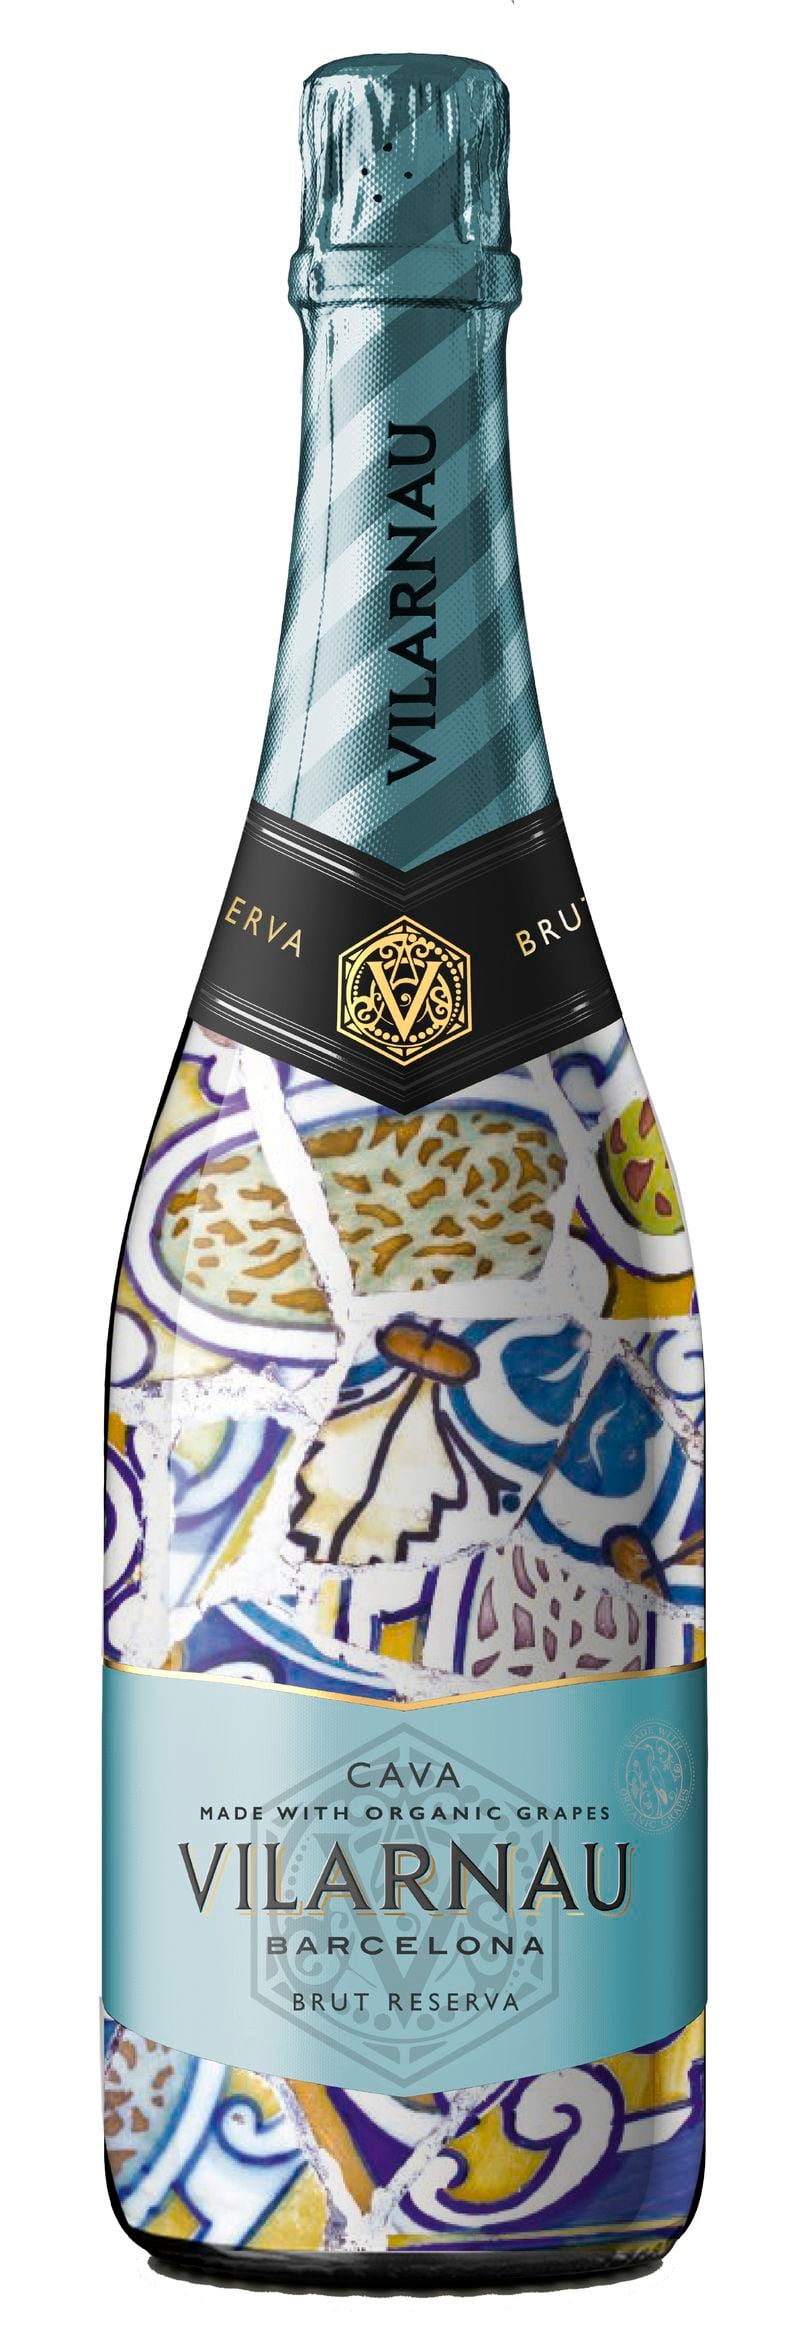 Viarnau cava bottles come wrapped in a colorful design that pays homage to architect Antoni Gaudi. Courtesy of Vilarnau